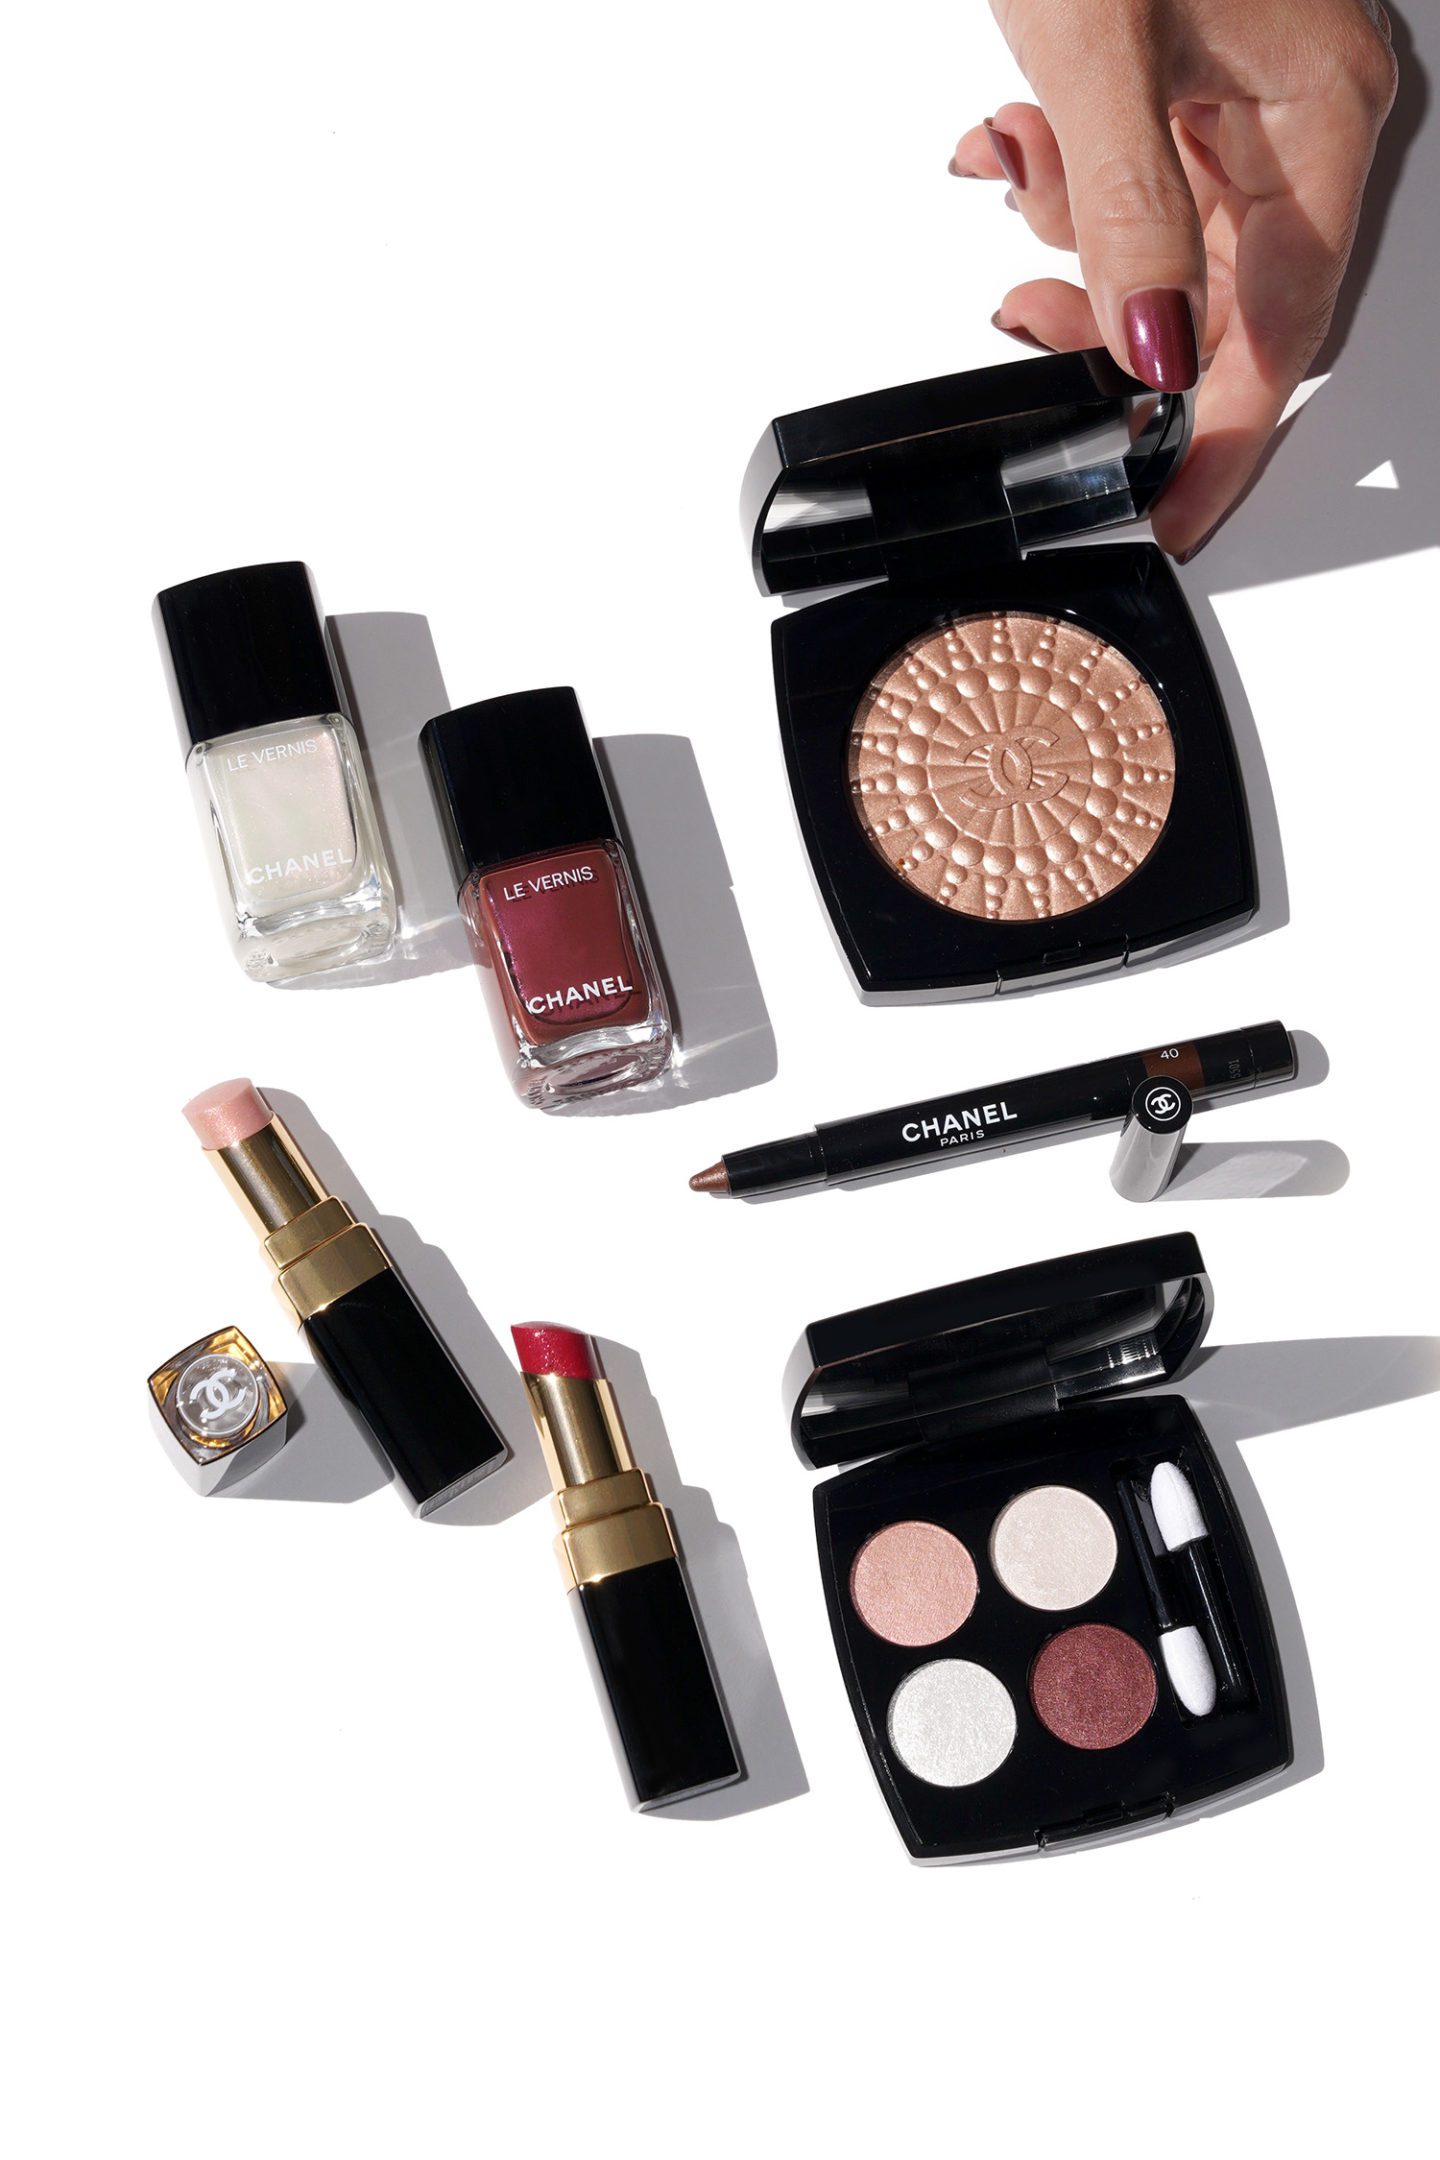 Chanel Archives - Page 4 of 83 - The Beauty Look Book